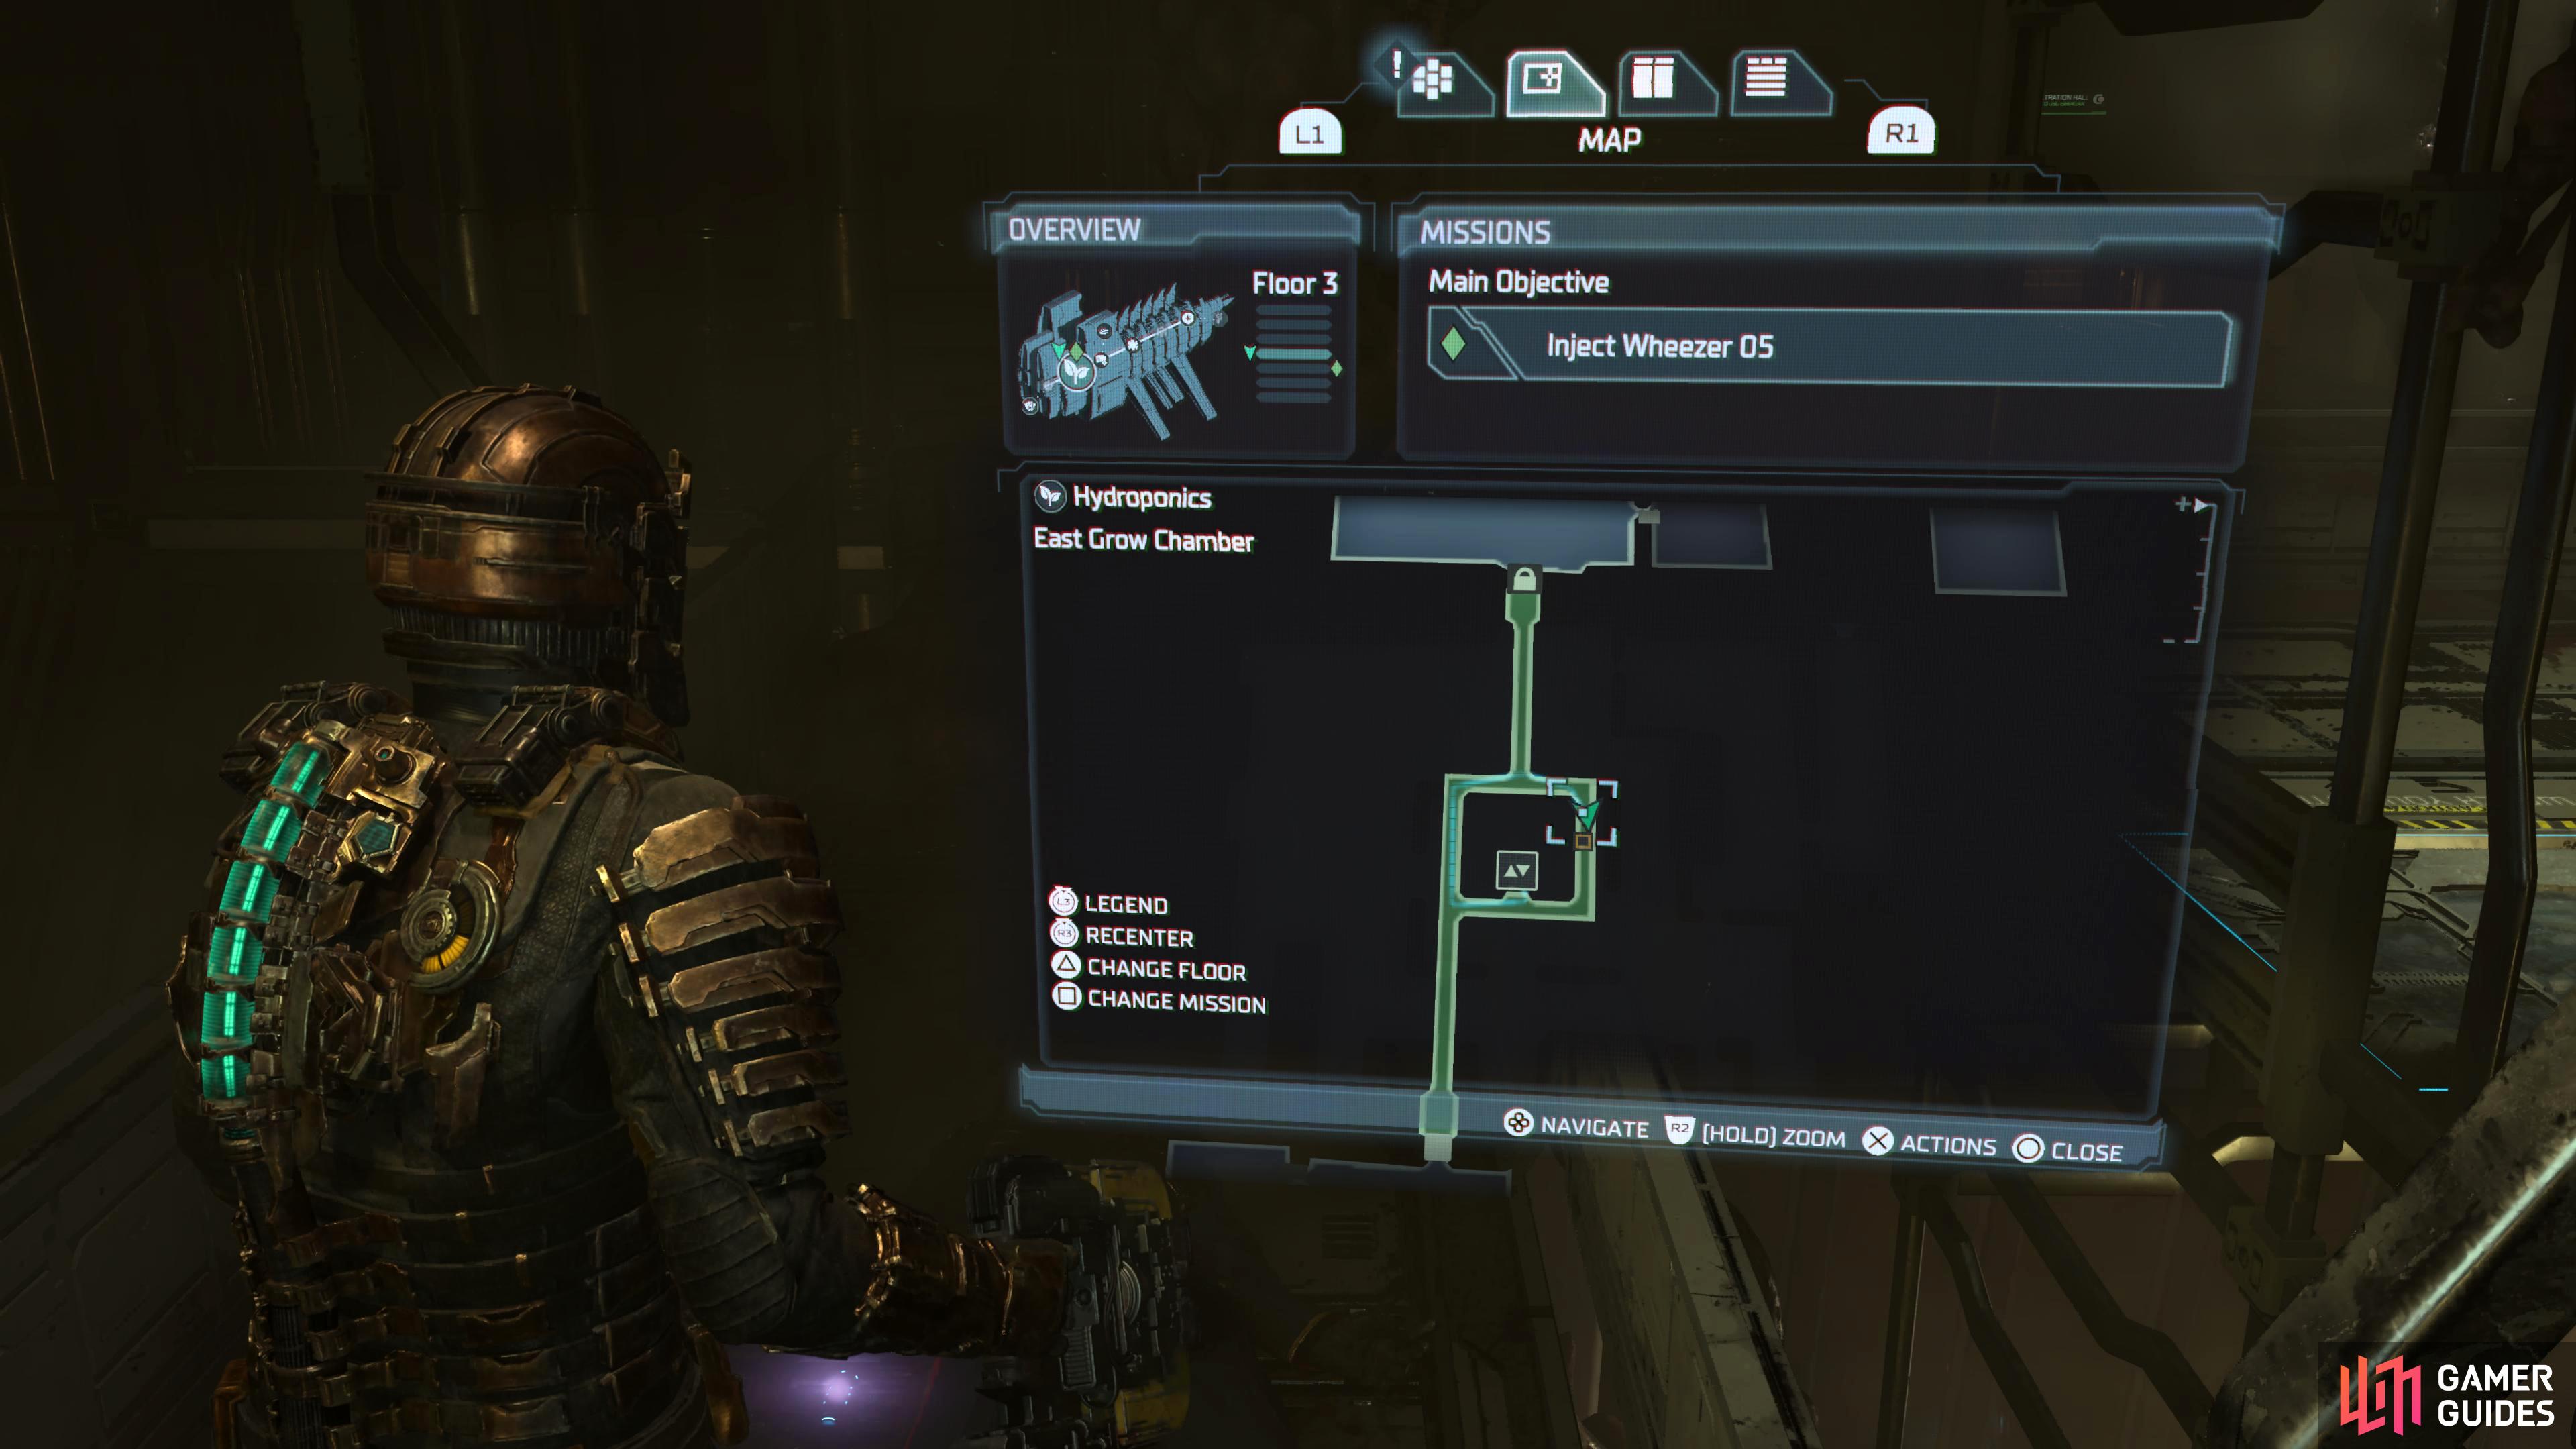 Holt's RIG will be in the East Grow Chamber in the Hydroponics during Chapter 6.